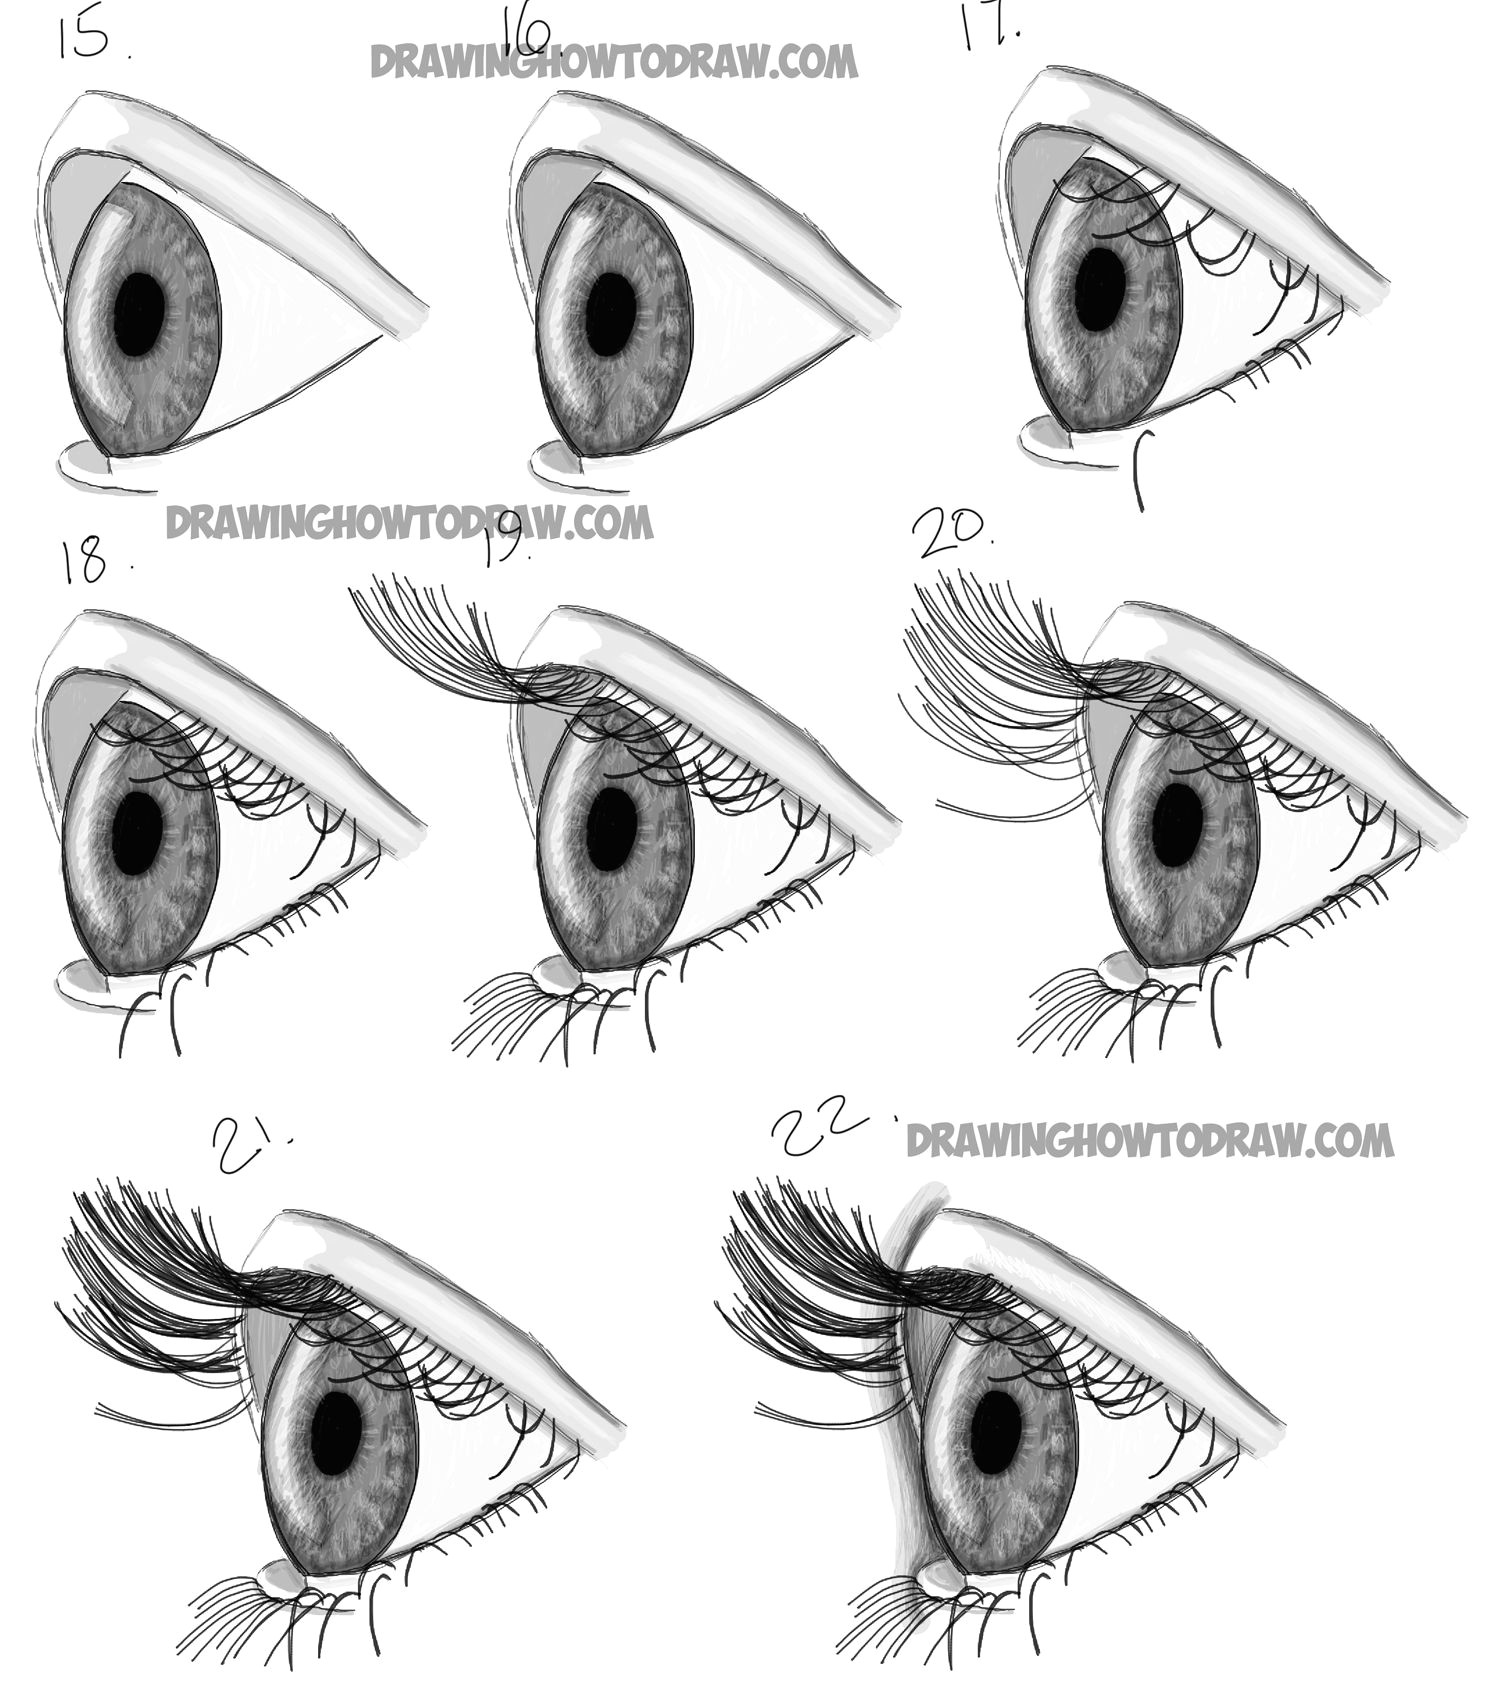 Drawing An Eye From the Side How to Draw Realistic Eyes From the Side Profile View Step by Step